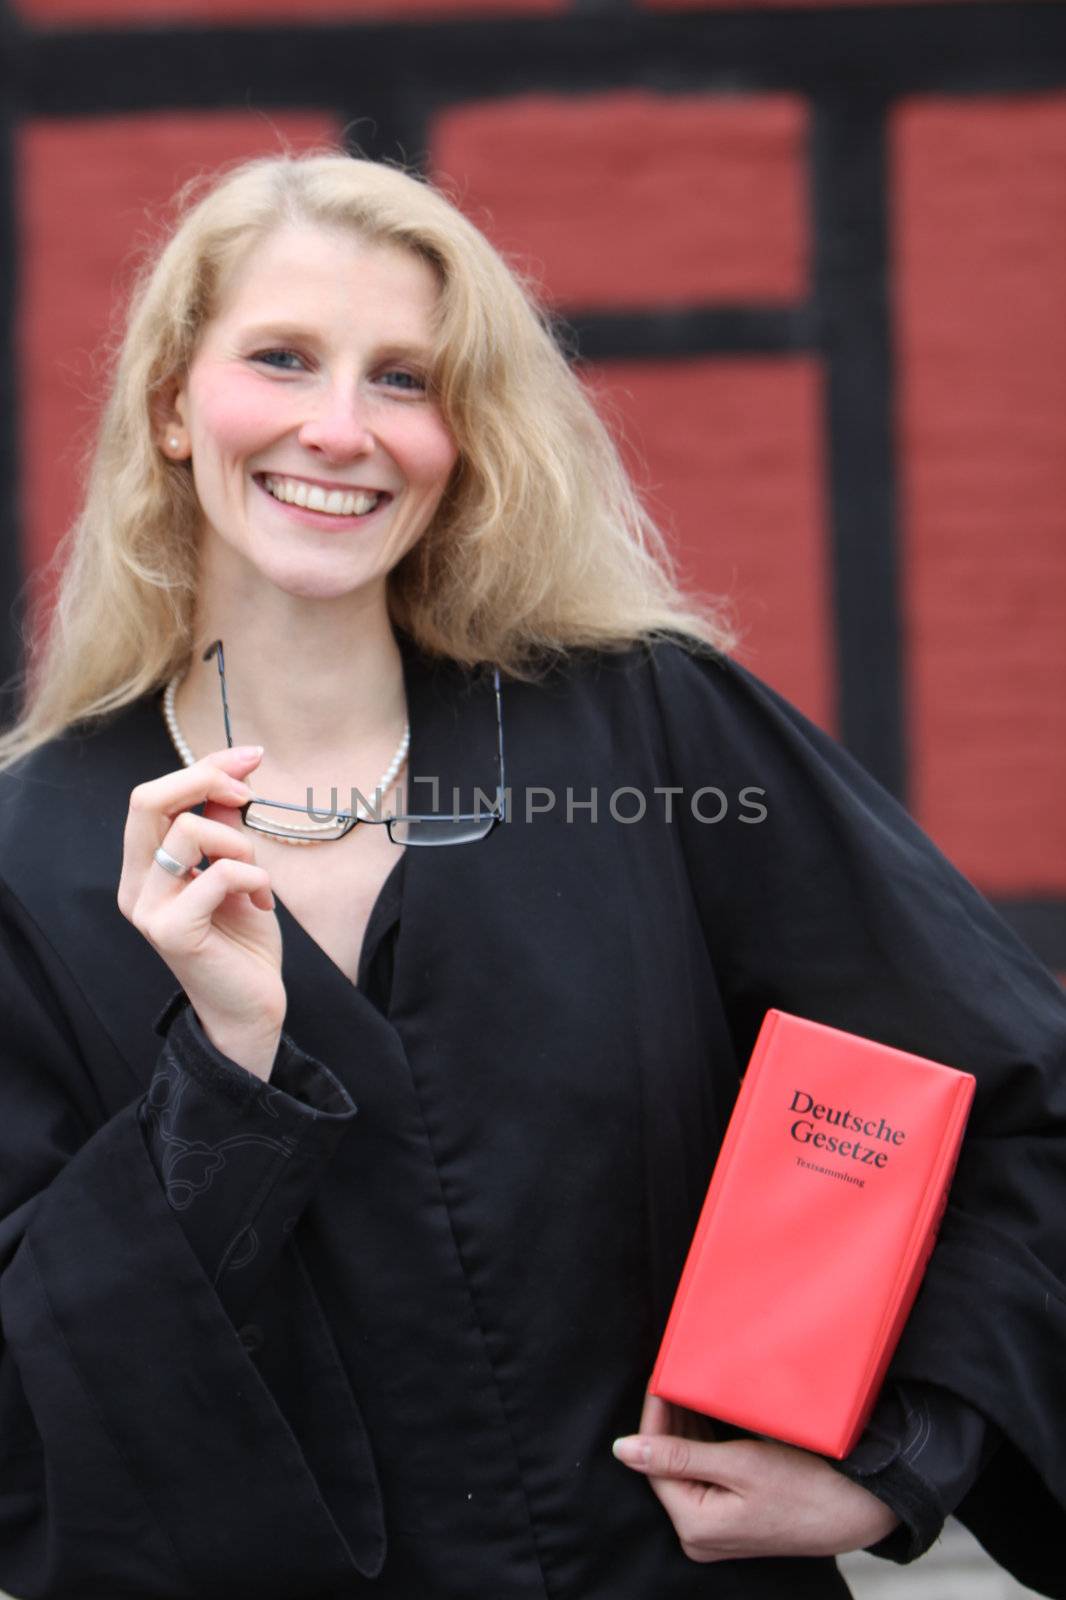 Friendly smiling law student or lawyer with red law book under h by Farina6000